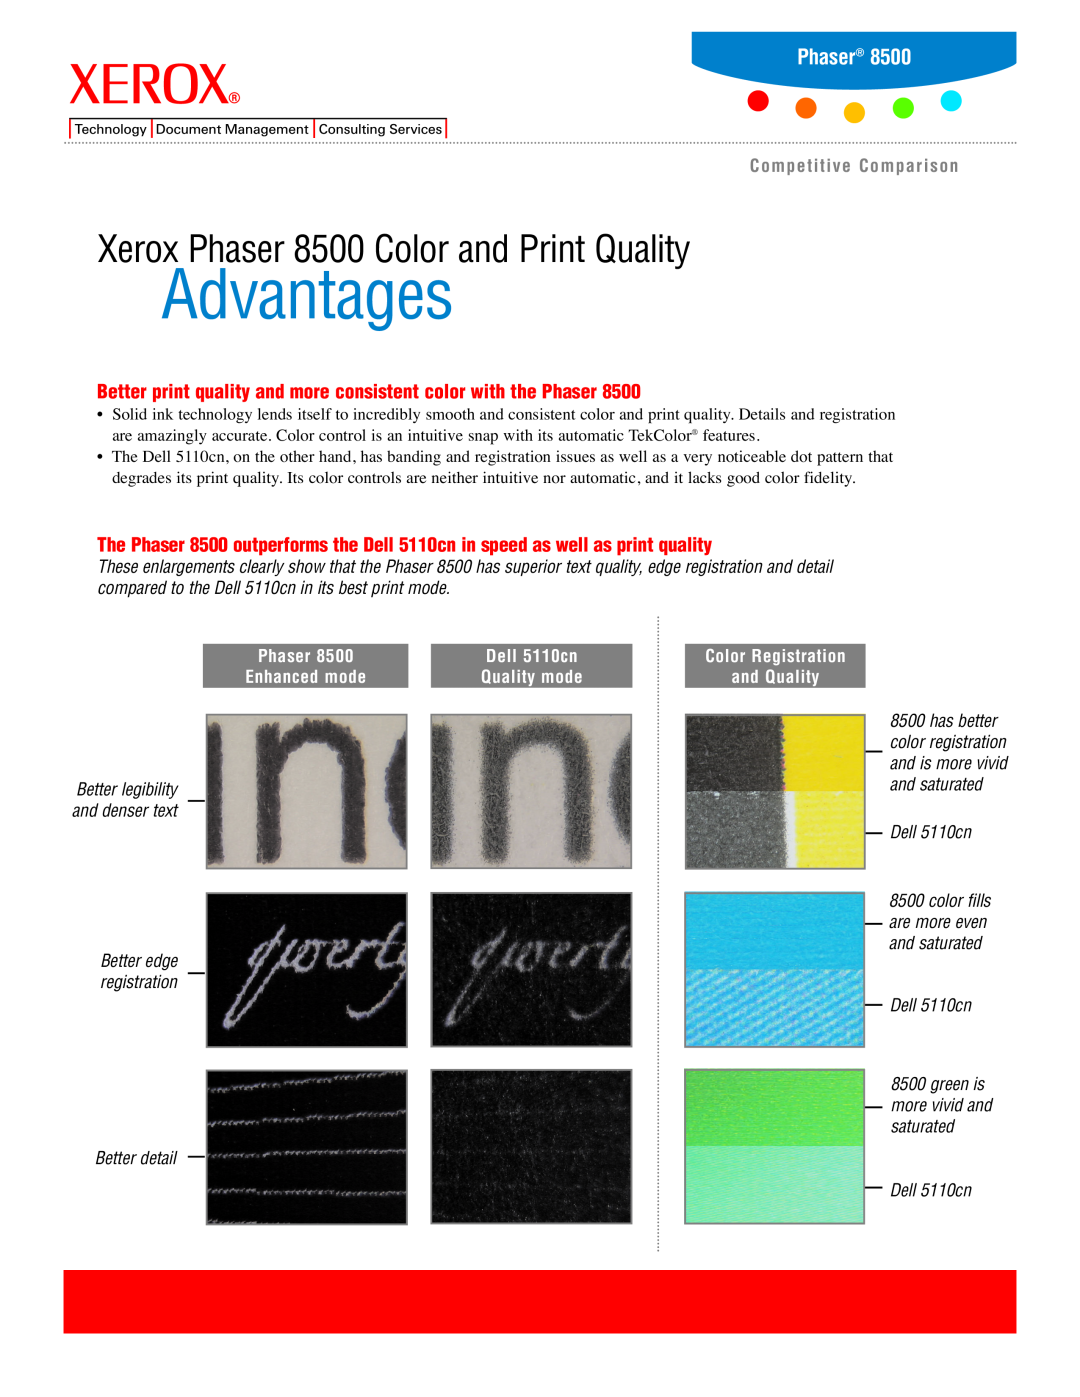 Xerox manual Advantages, Xerox Phaser 8500 Color and Print Quality 